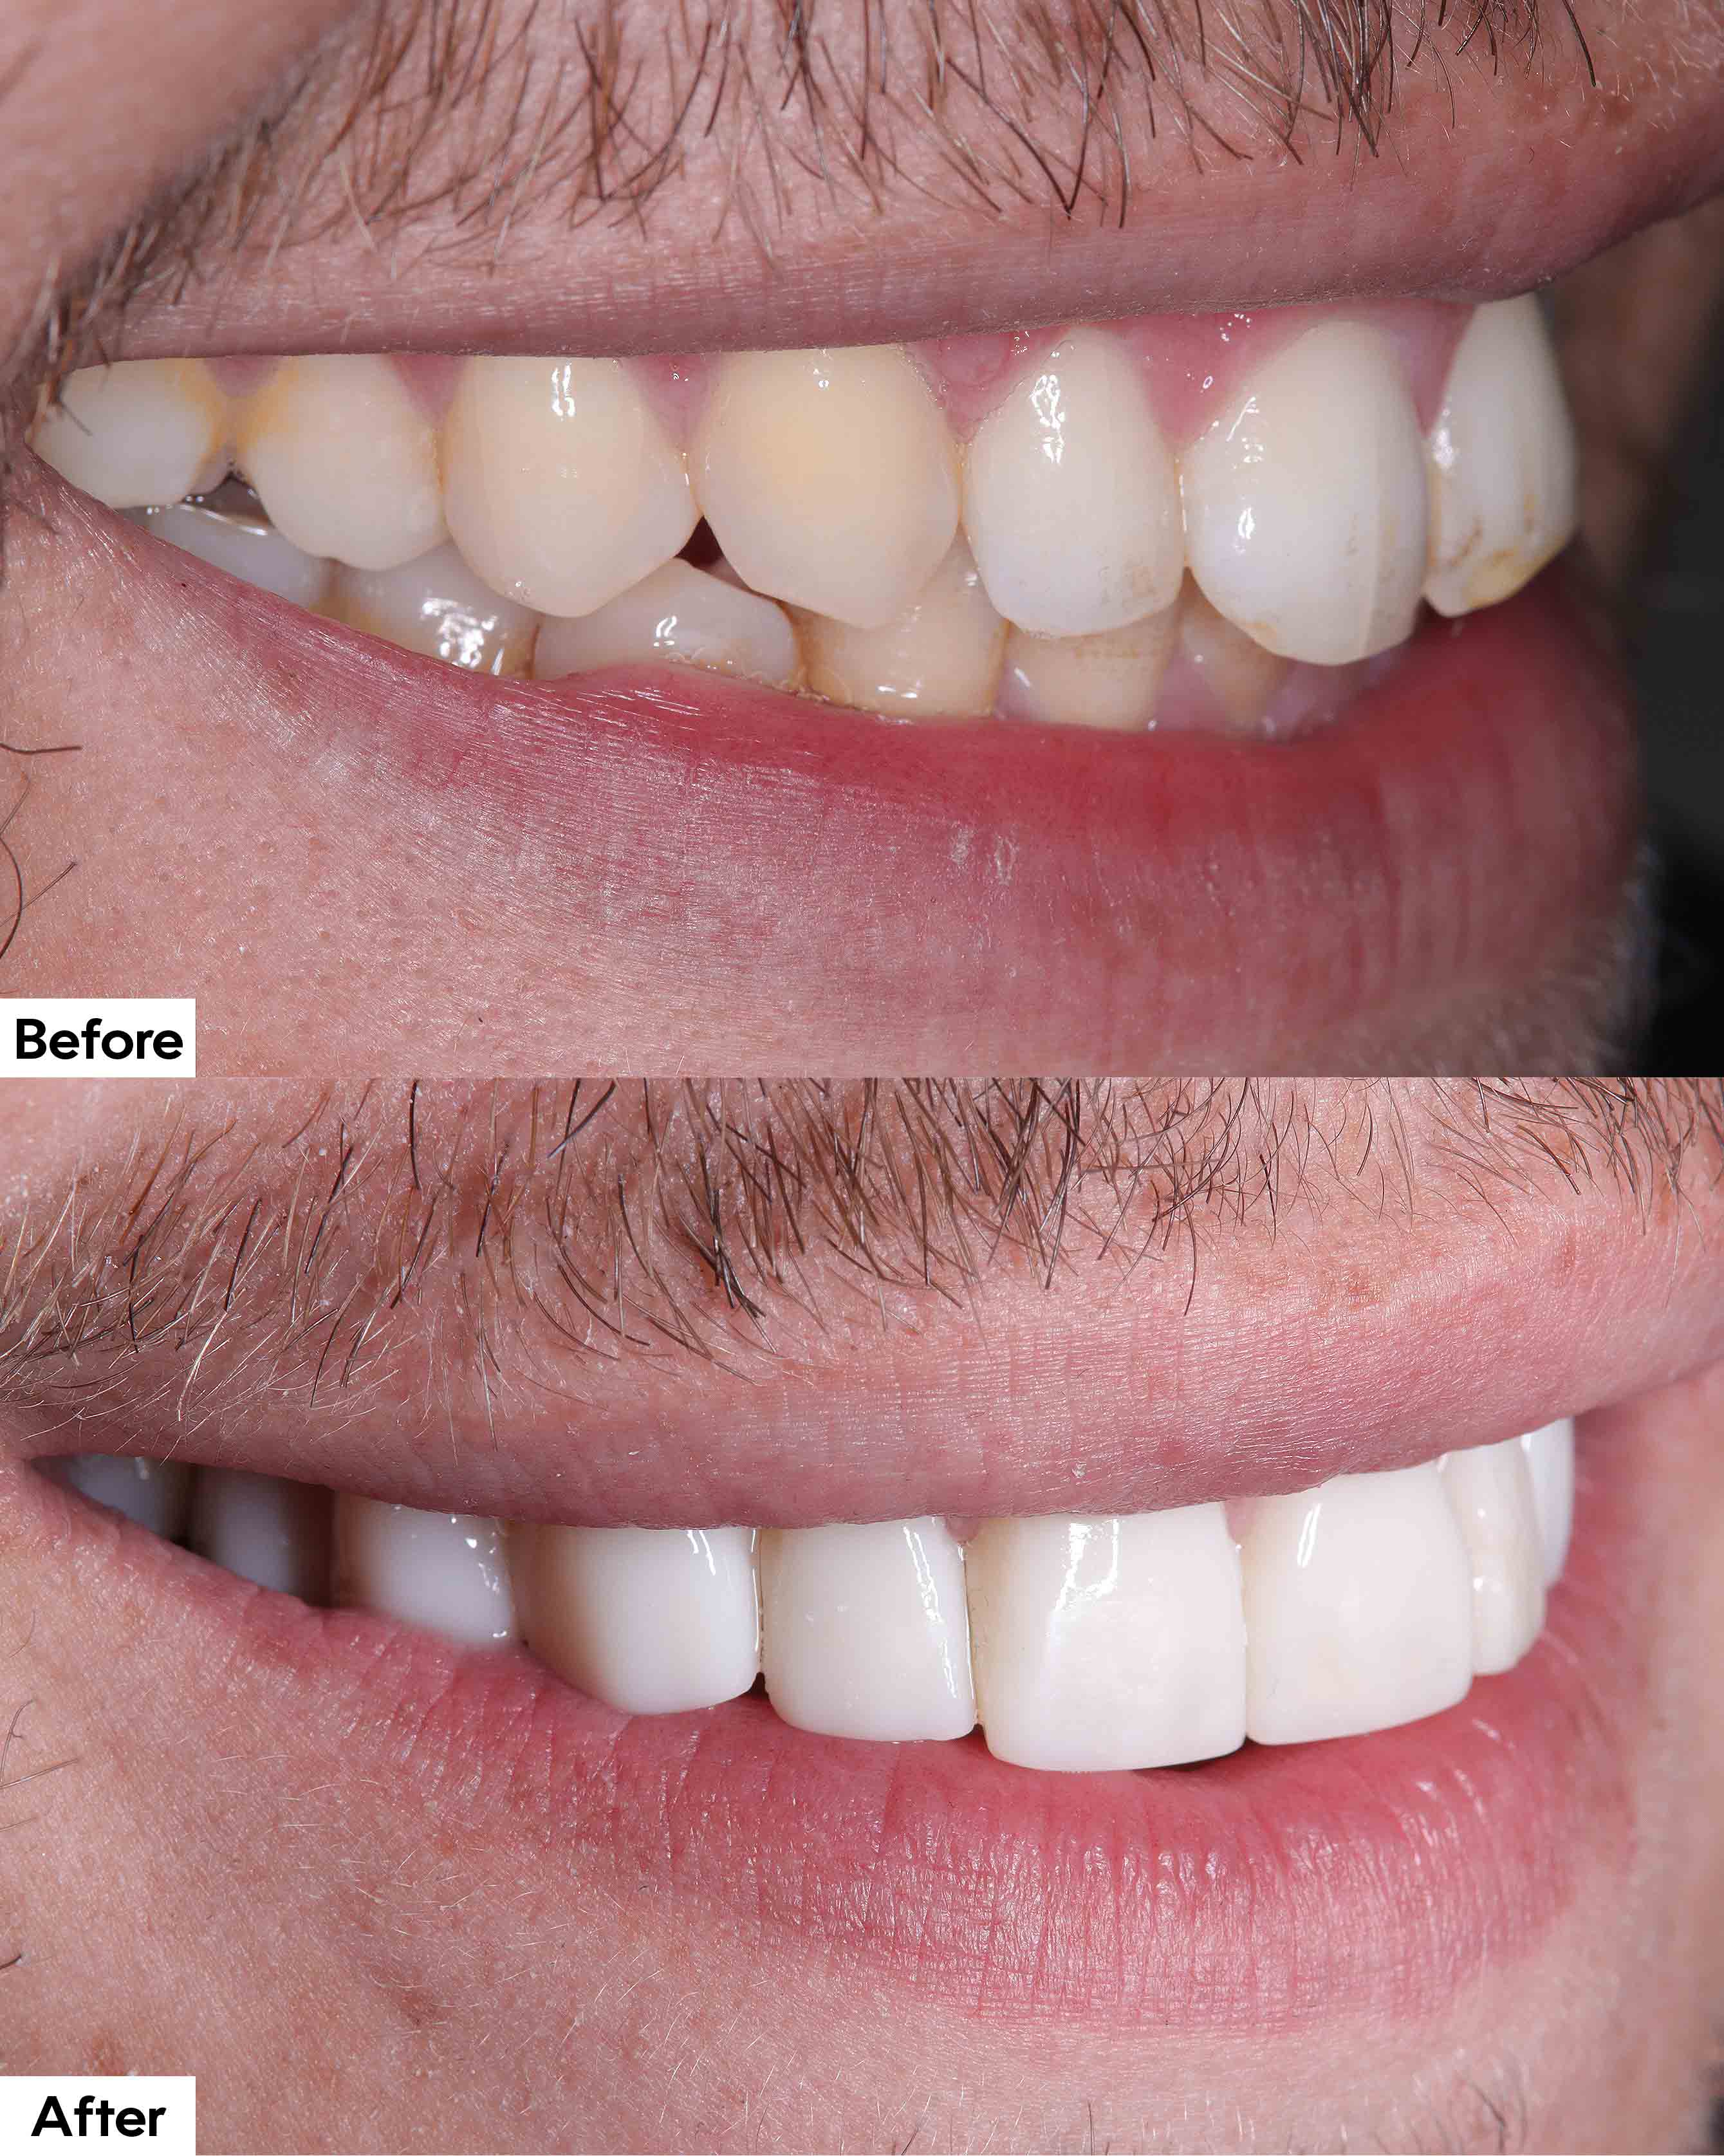 Before and after teeth repair with composite dental bonding